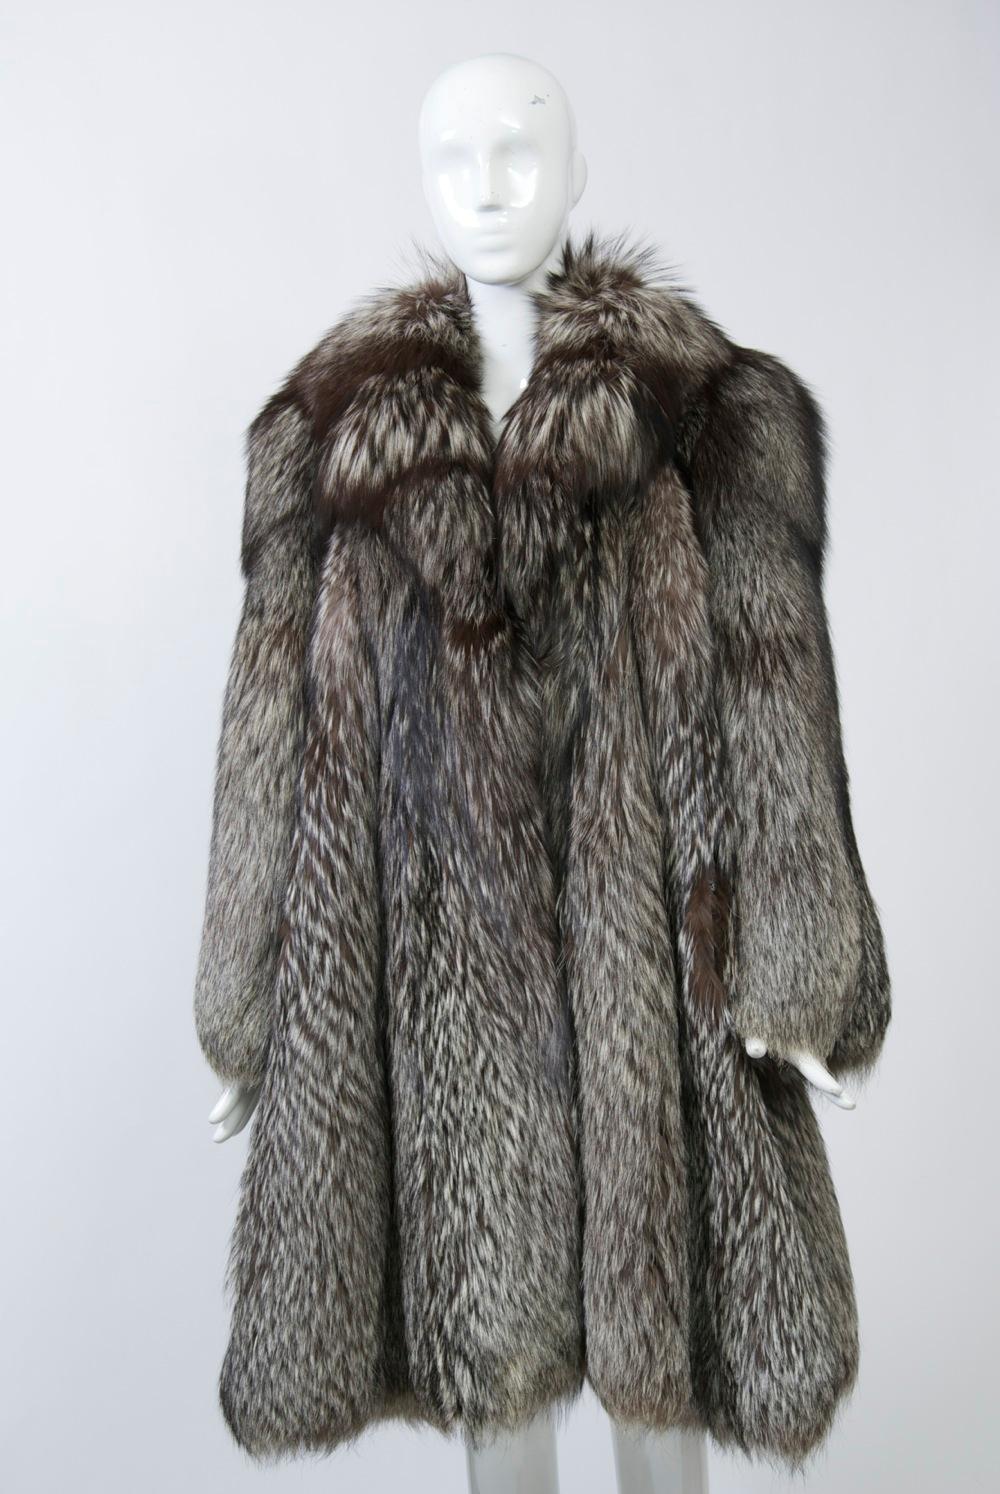 Knee-length silver fox coat featuring luxurious, full pelts, a notched collar and wide sleeves. The hem is scalloped following the natural curve of the vertical skins. Slash pockets. Two secure fur hook closure. Black and white print lining labeled